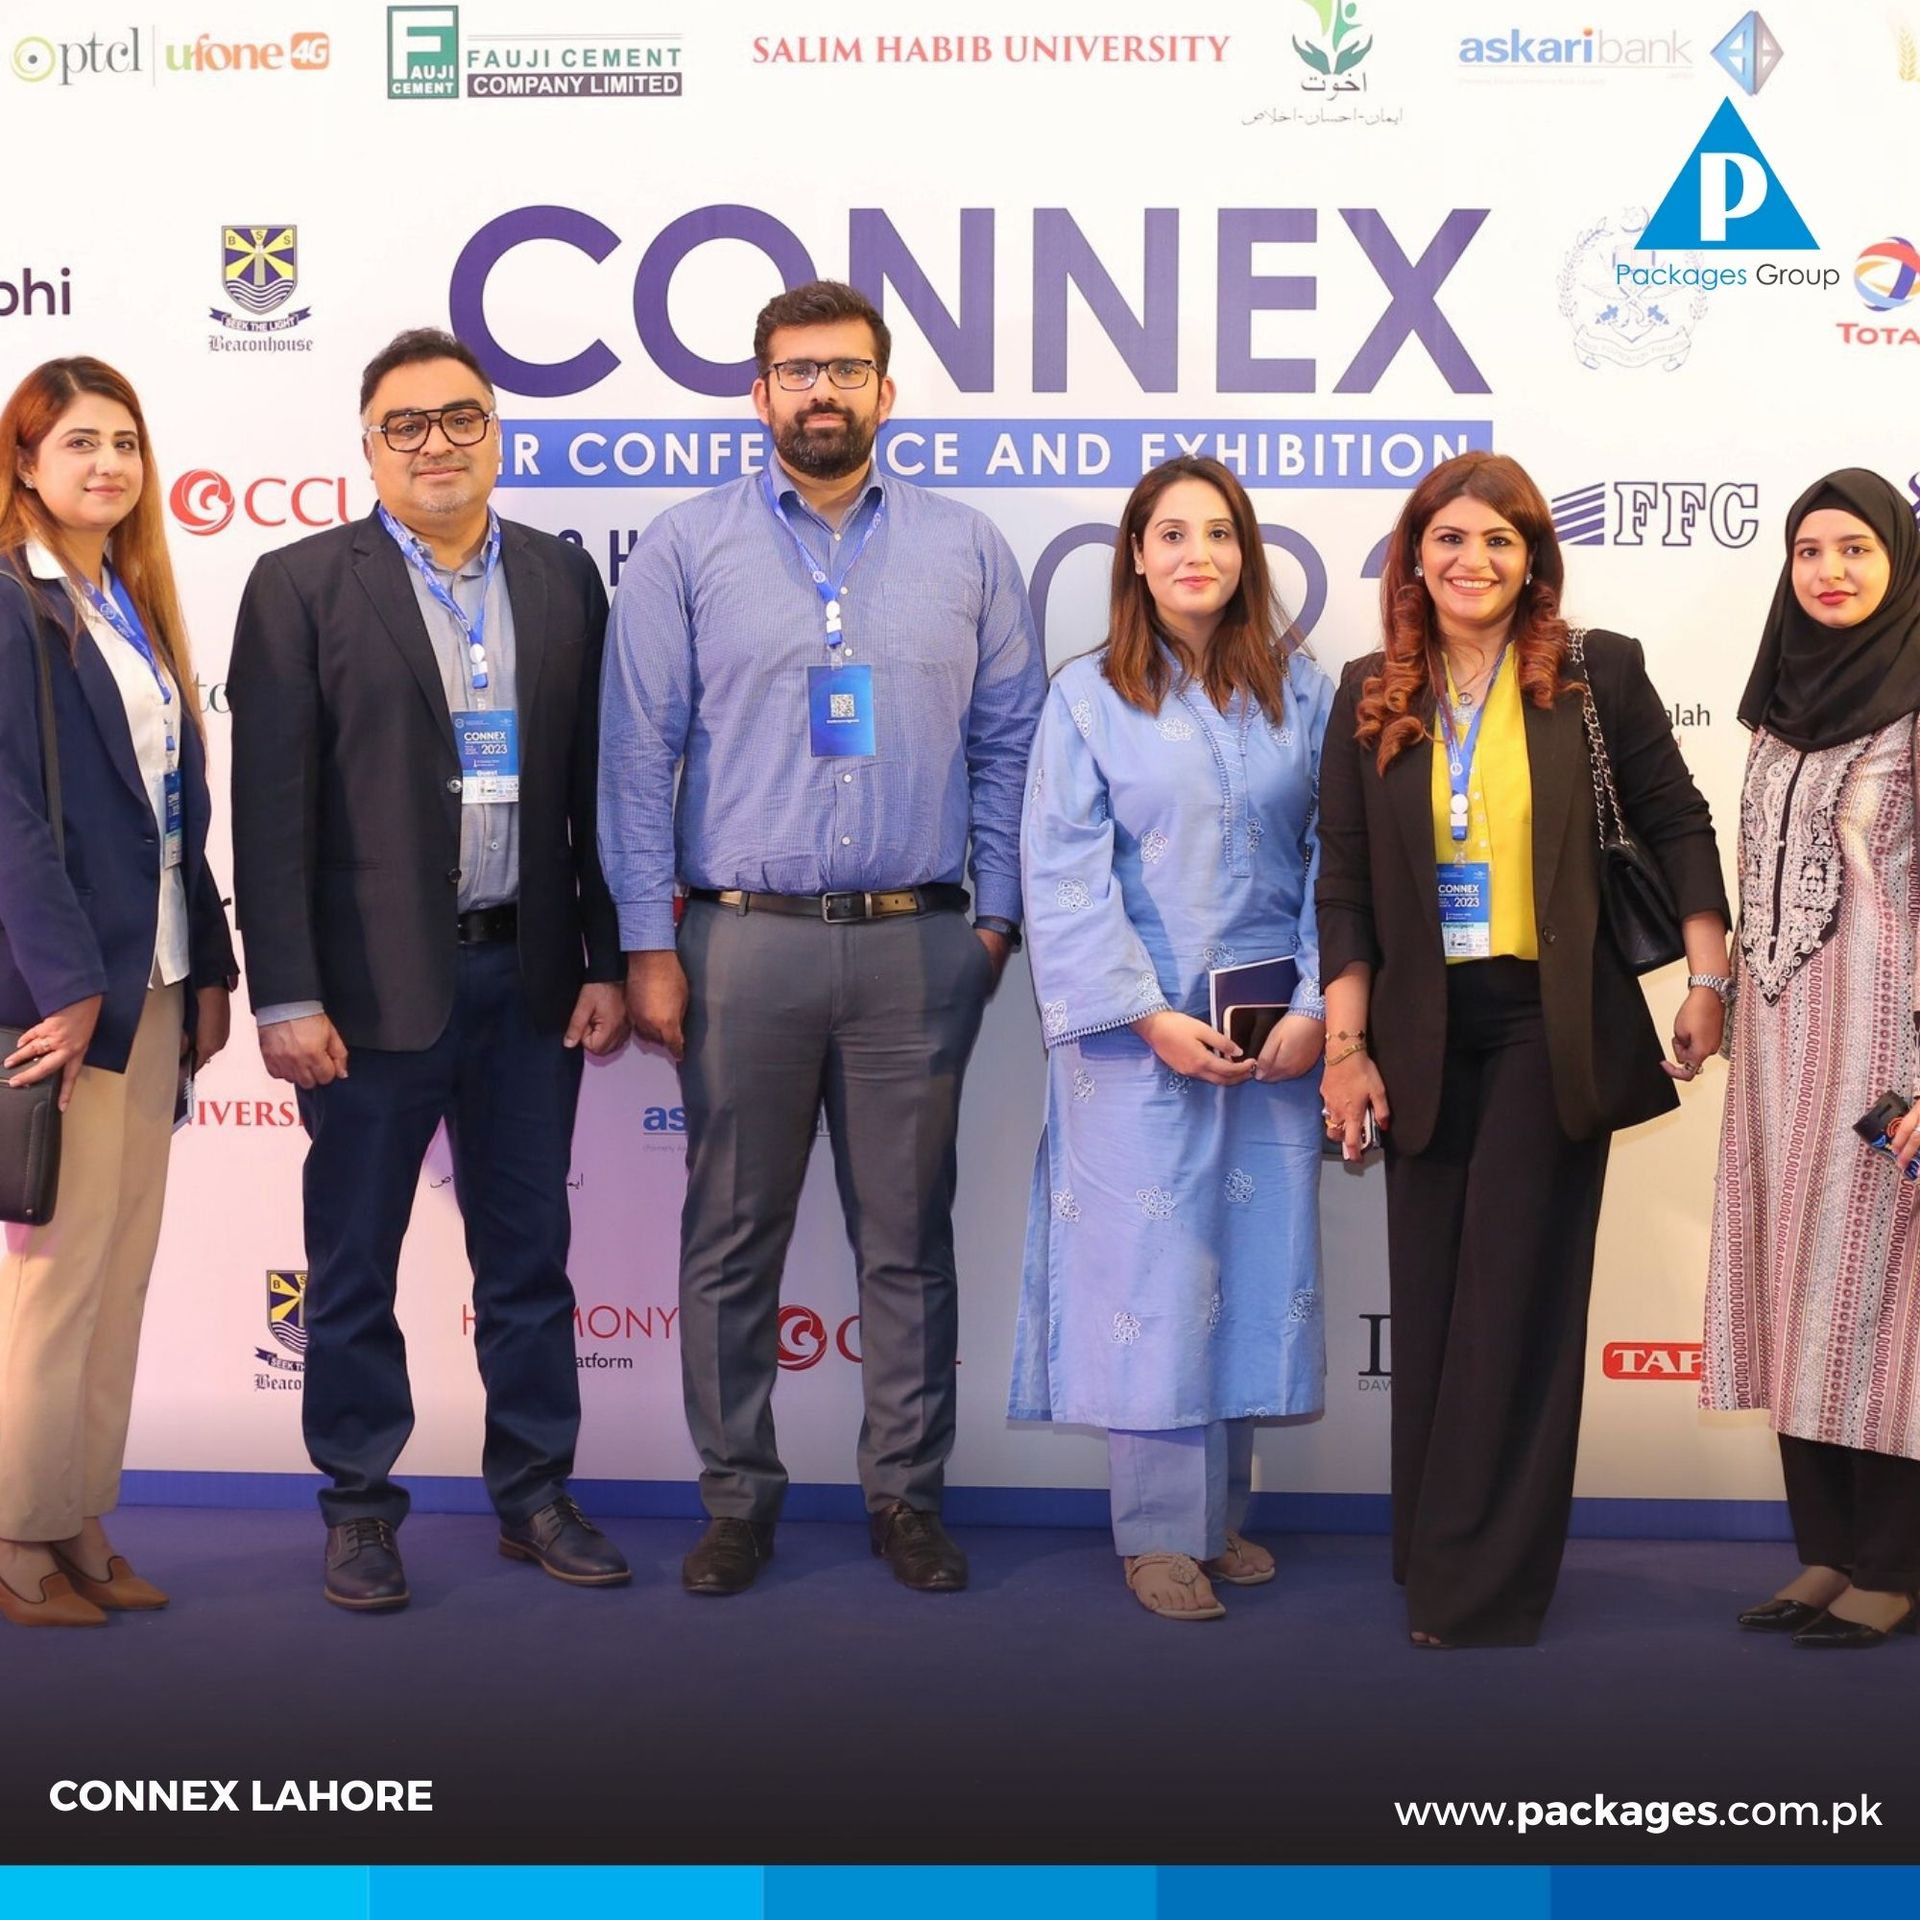 The Packages Group HR Team Attended Connex4